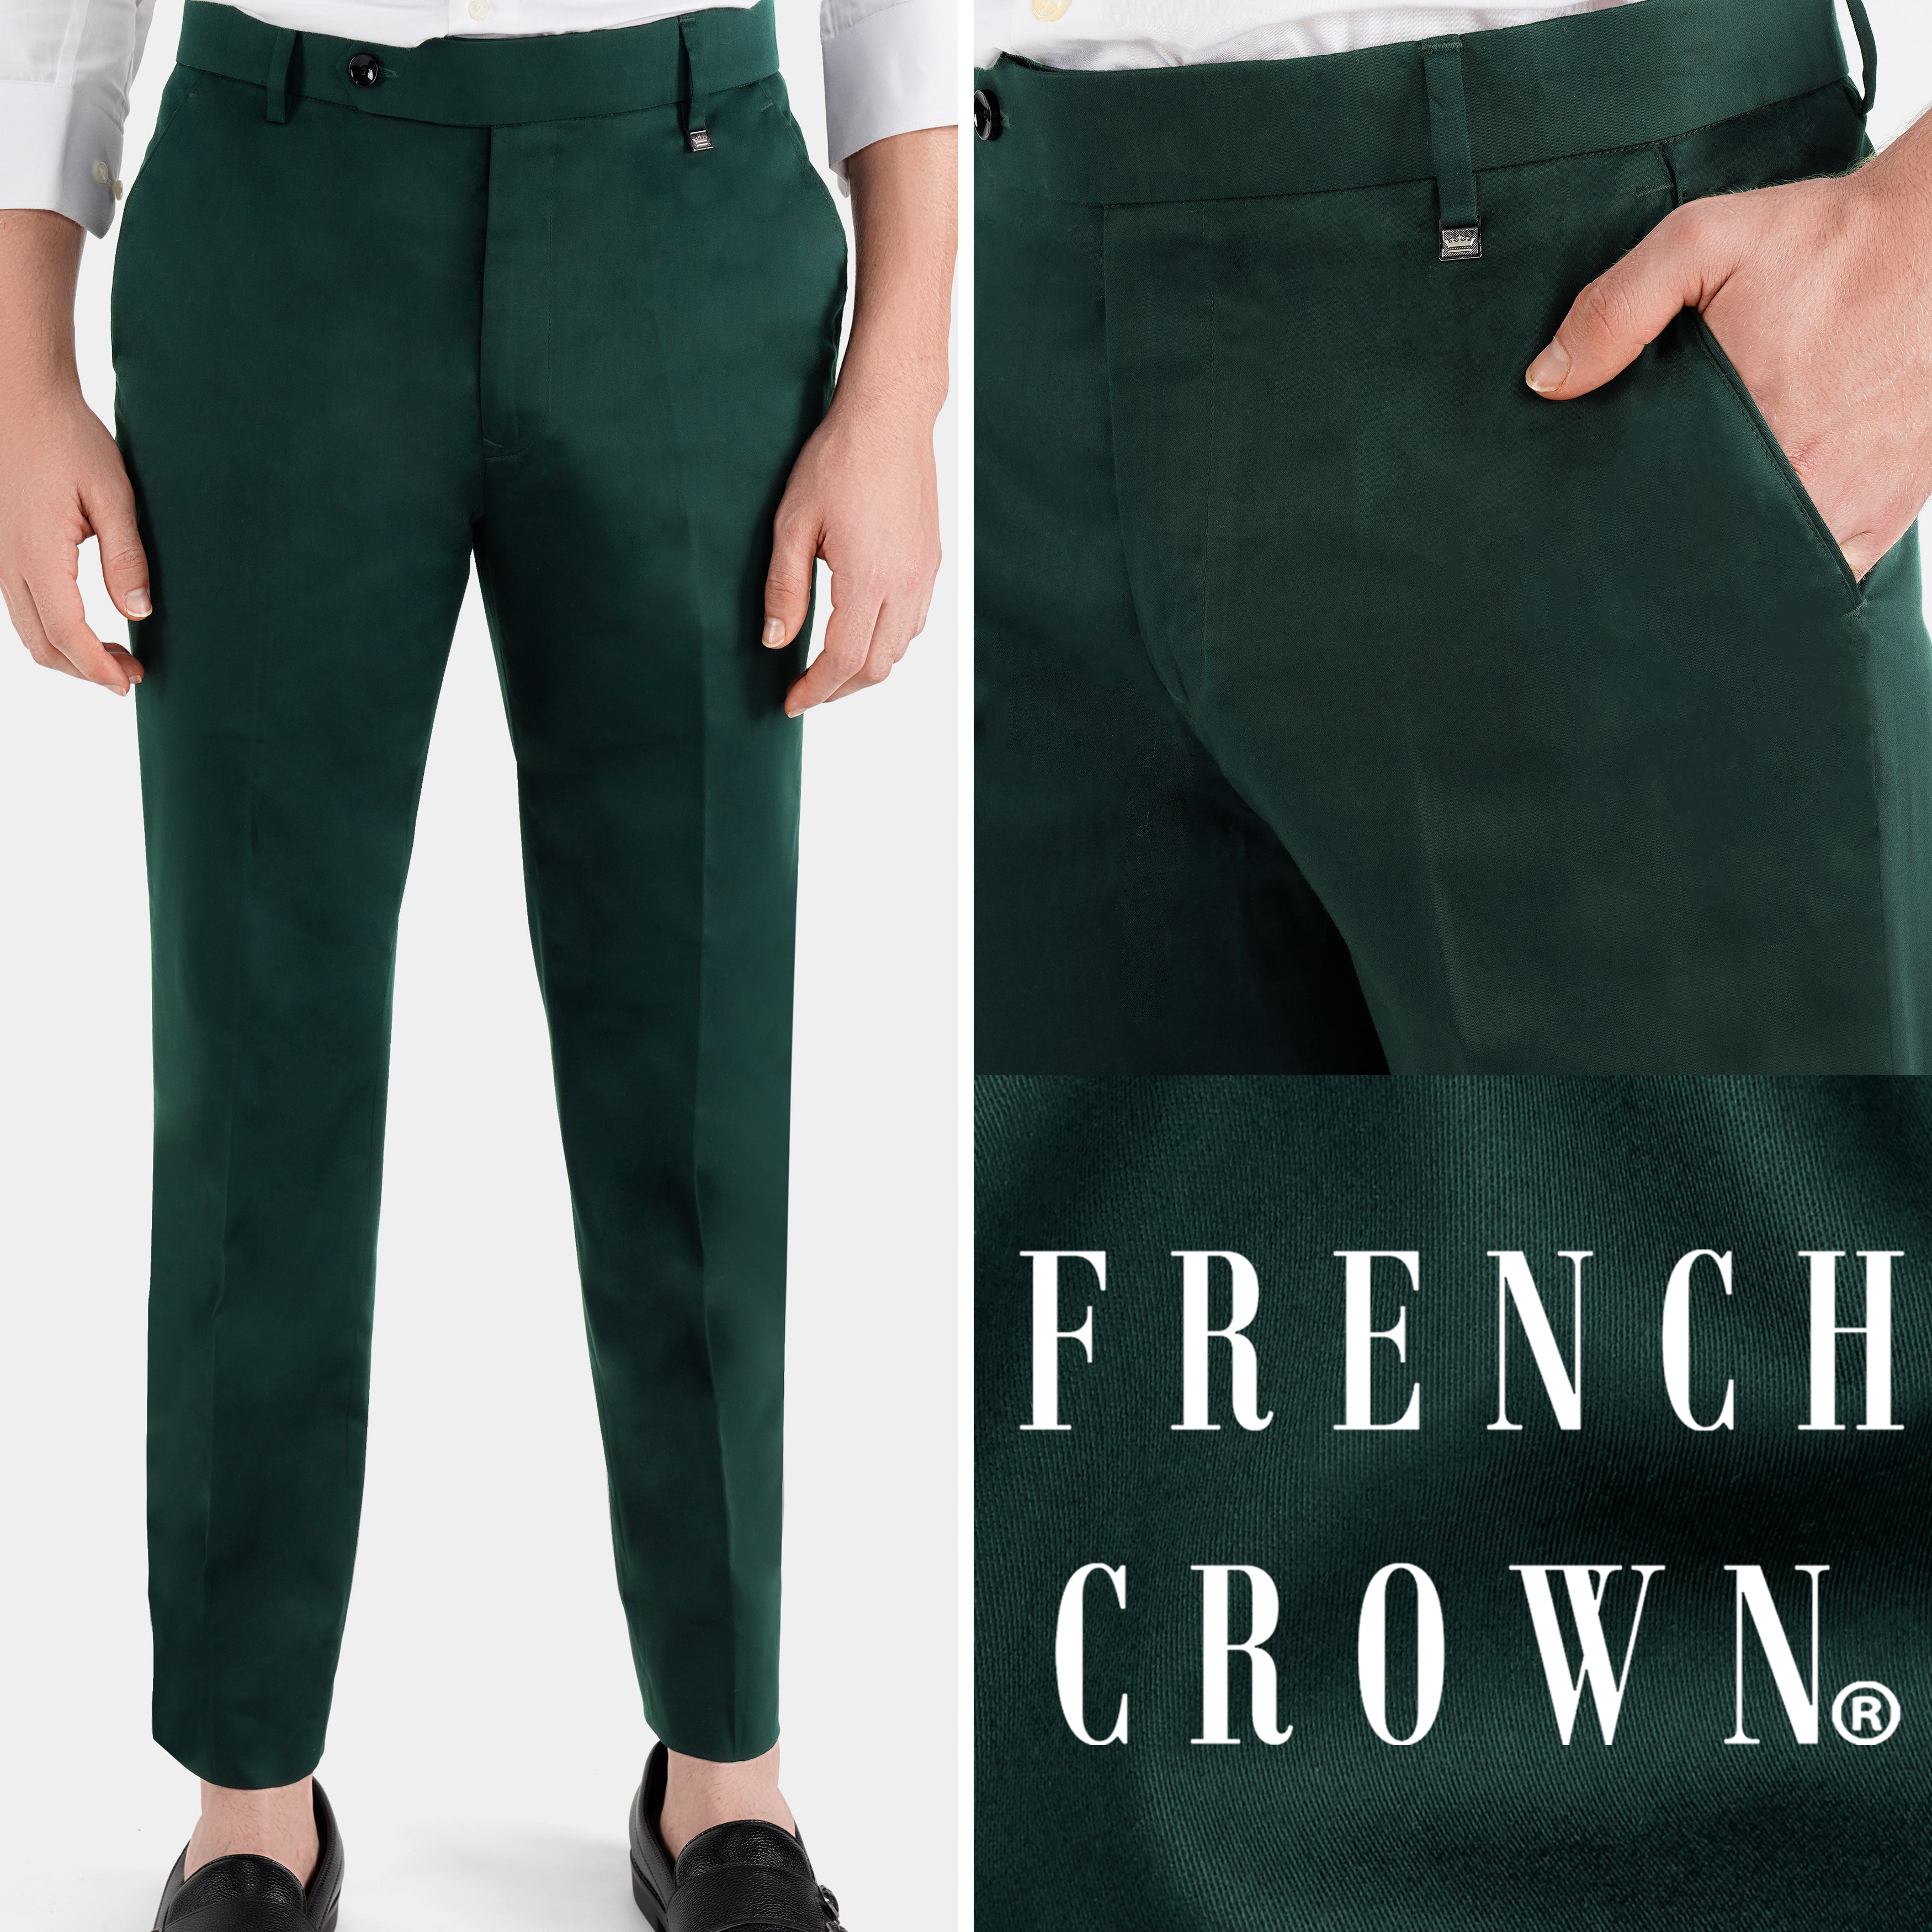 Tracksuit trousers for men and women in asparagus green cotton